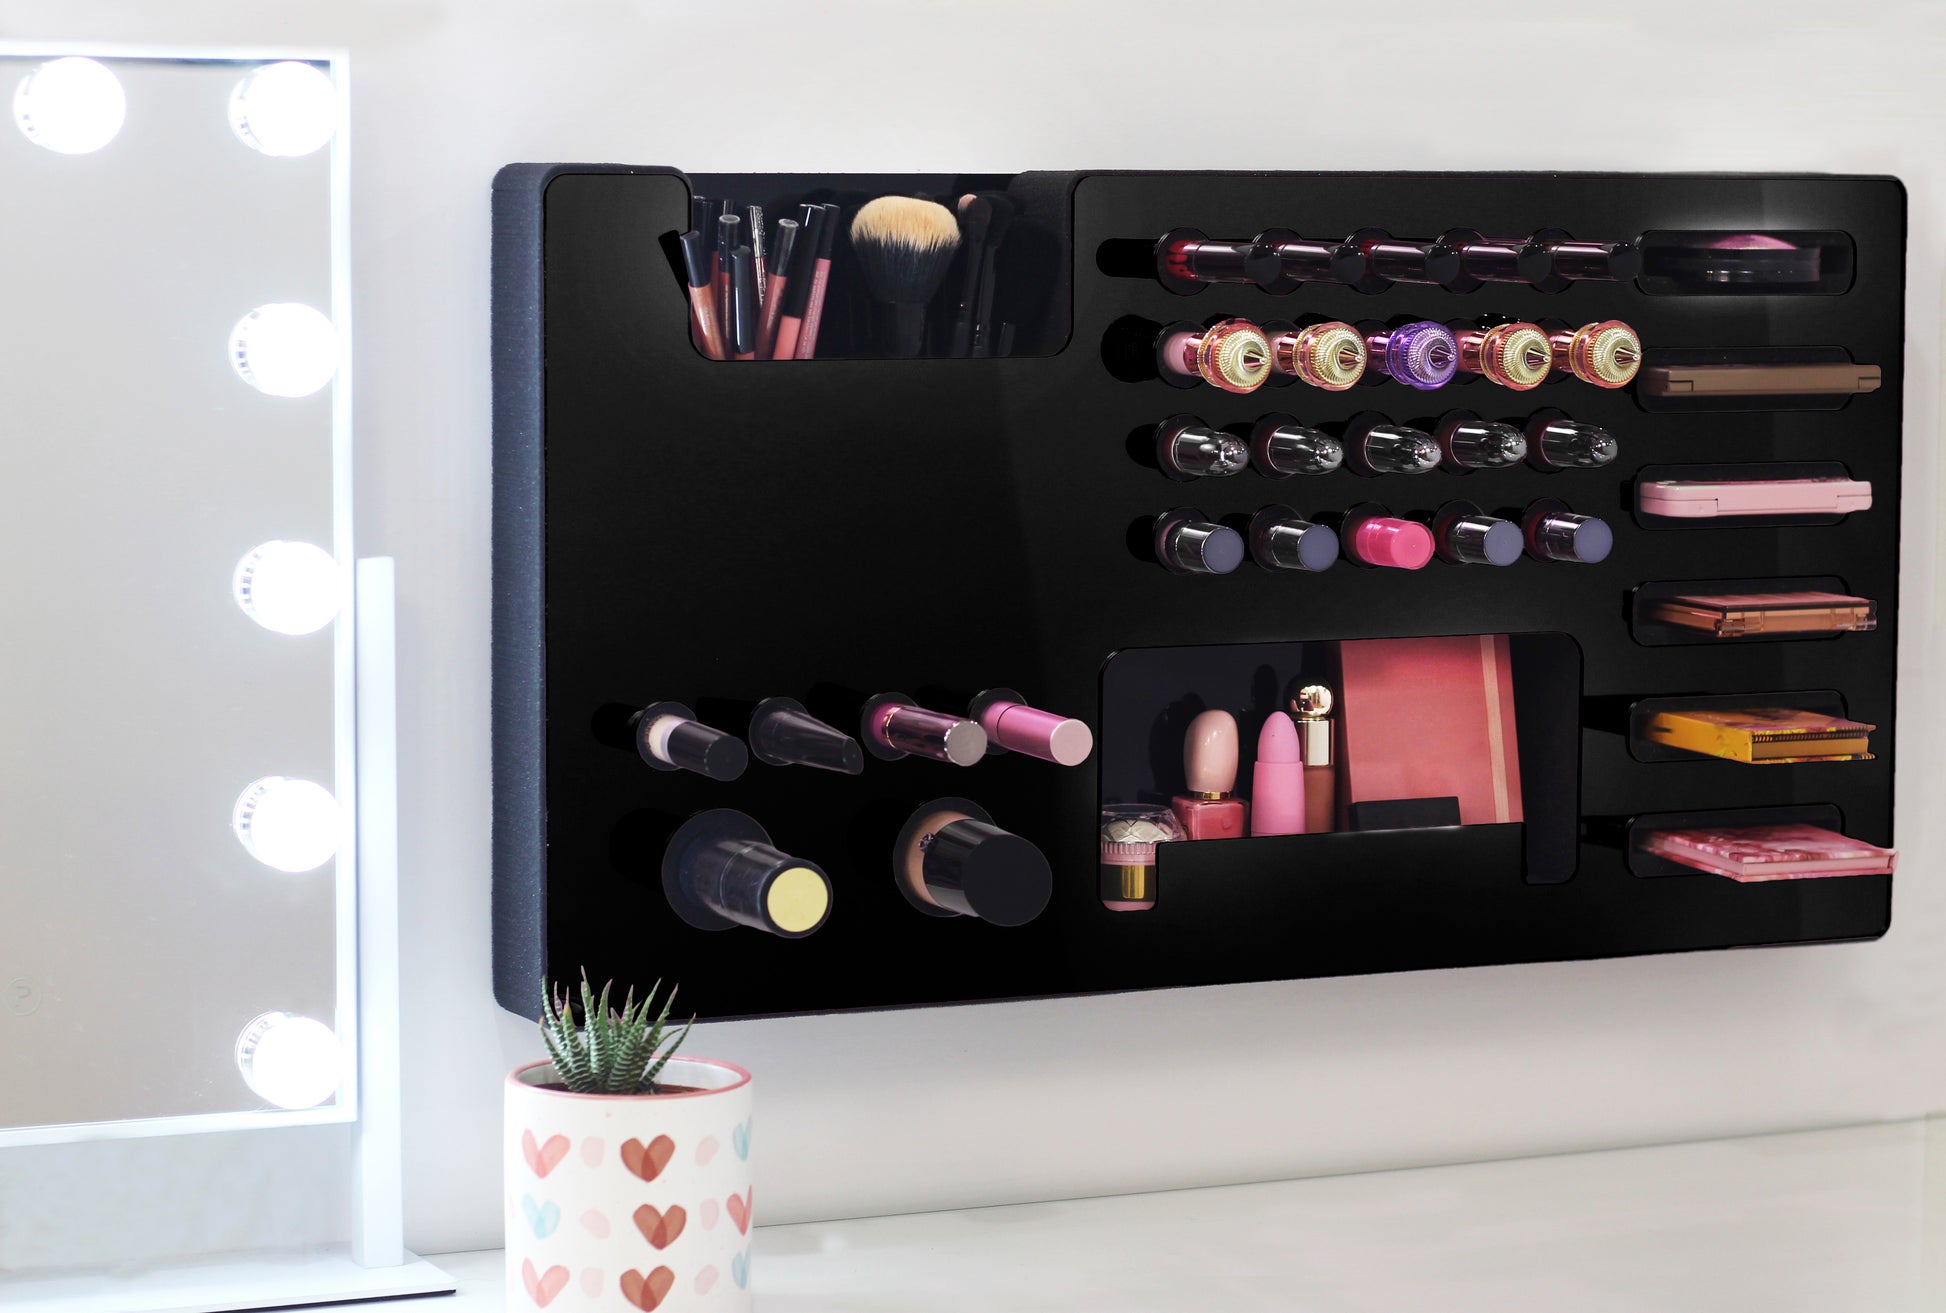 Black Ultra Complete Makeup Solution Organizer shown mounted on the wall holding lipsticks, lip glosses, nail polishes, brushes, sunglasses and more by keeping items accessible and off of the counter. Shown next to a makeup vanity with samples of suggested items the organizer can hold. Tilted to the right to show the wall mounted makeup organizer at a different angle while still on the wall.